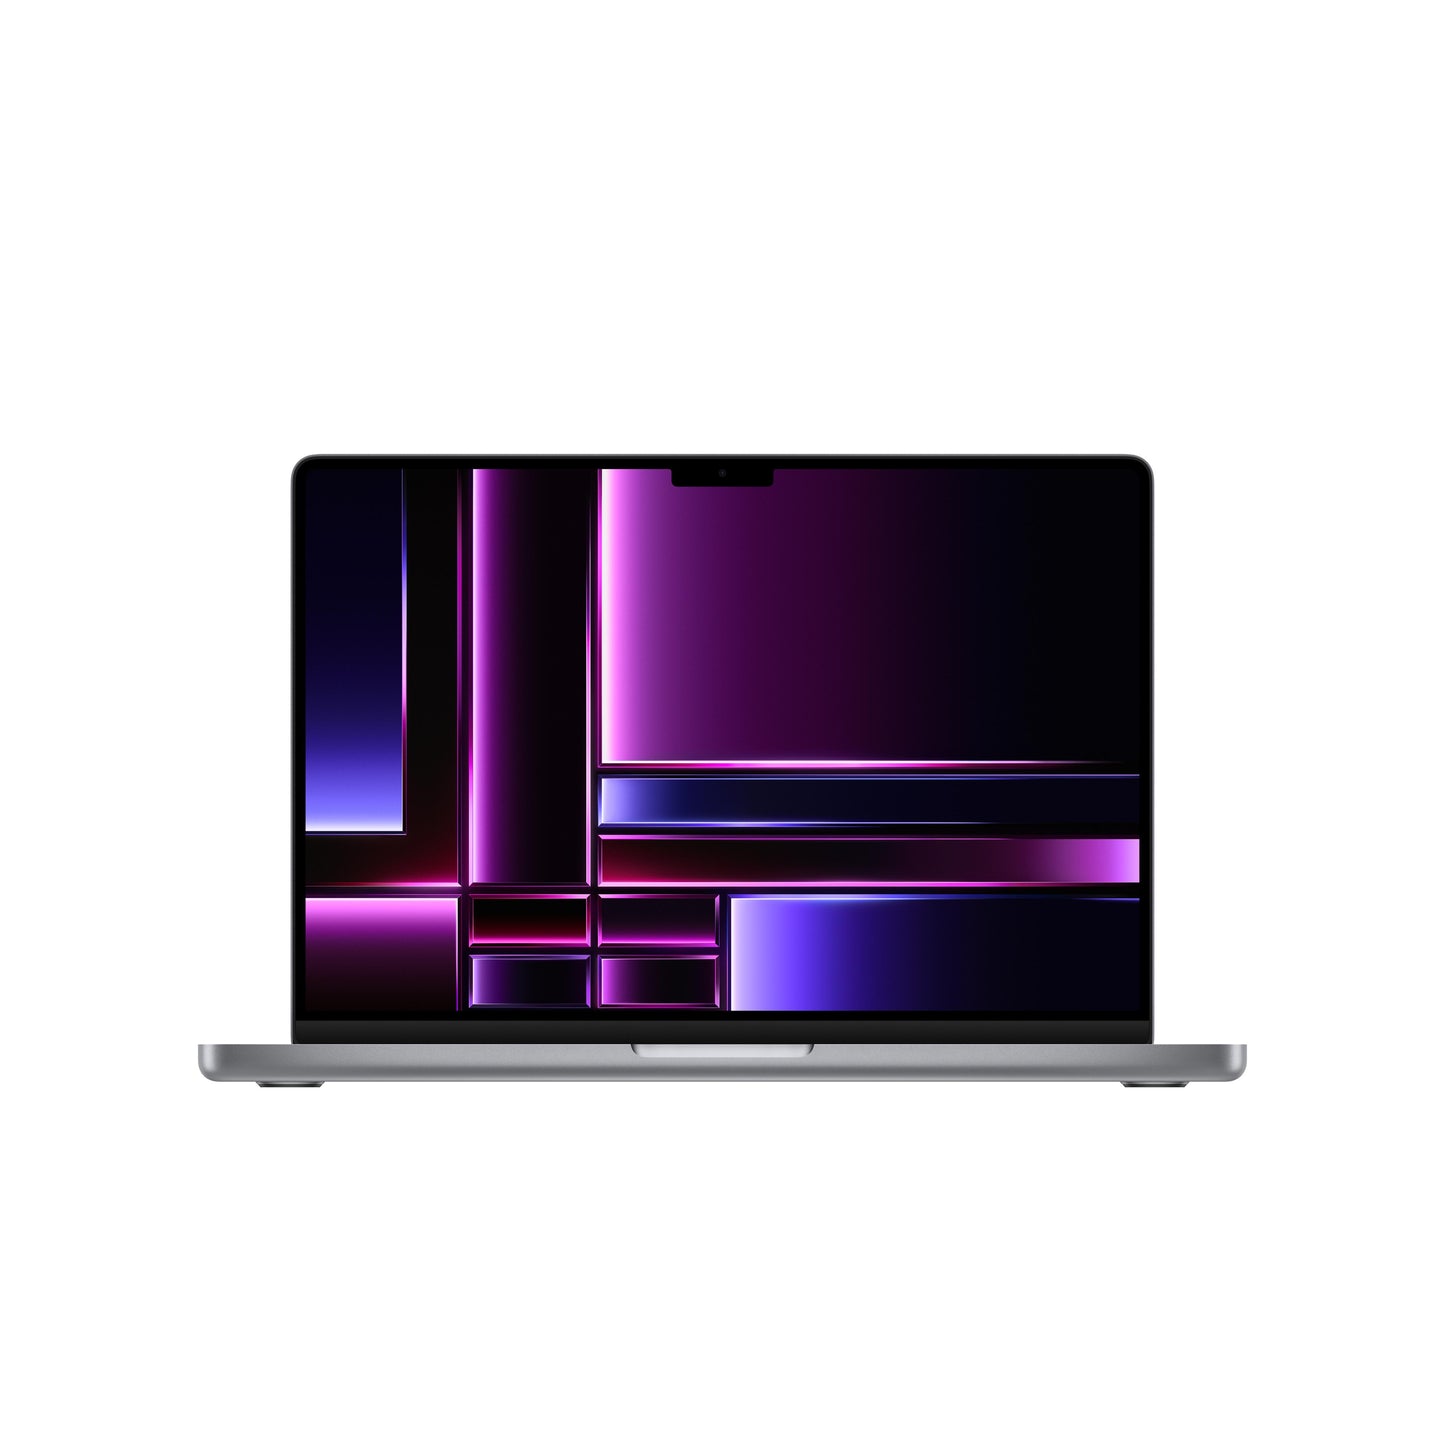 14-inch MacBook Pro: Apple M2 Max chip with 12_core CPU and 30_core GPU, 1TB SSD - Space Grey